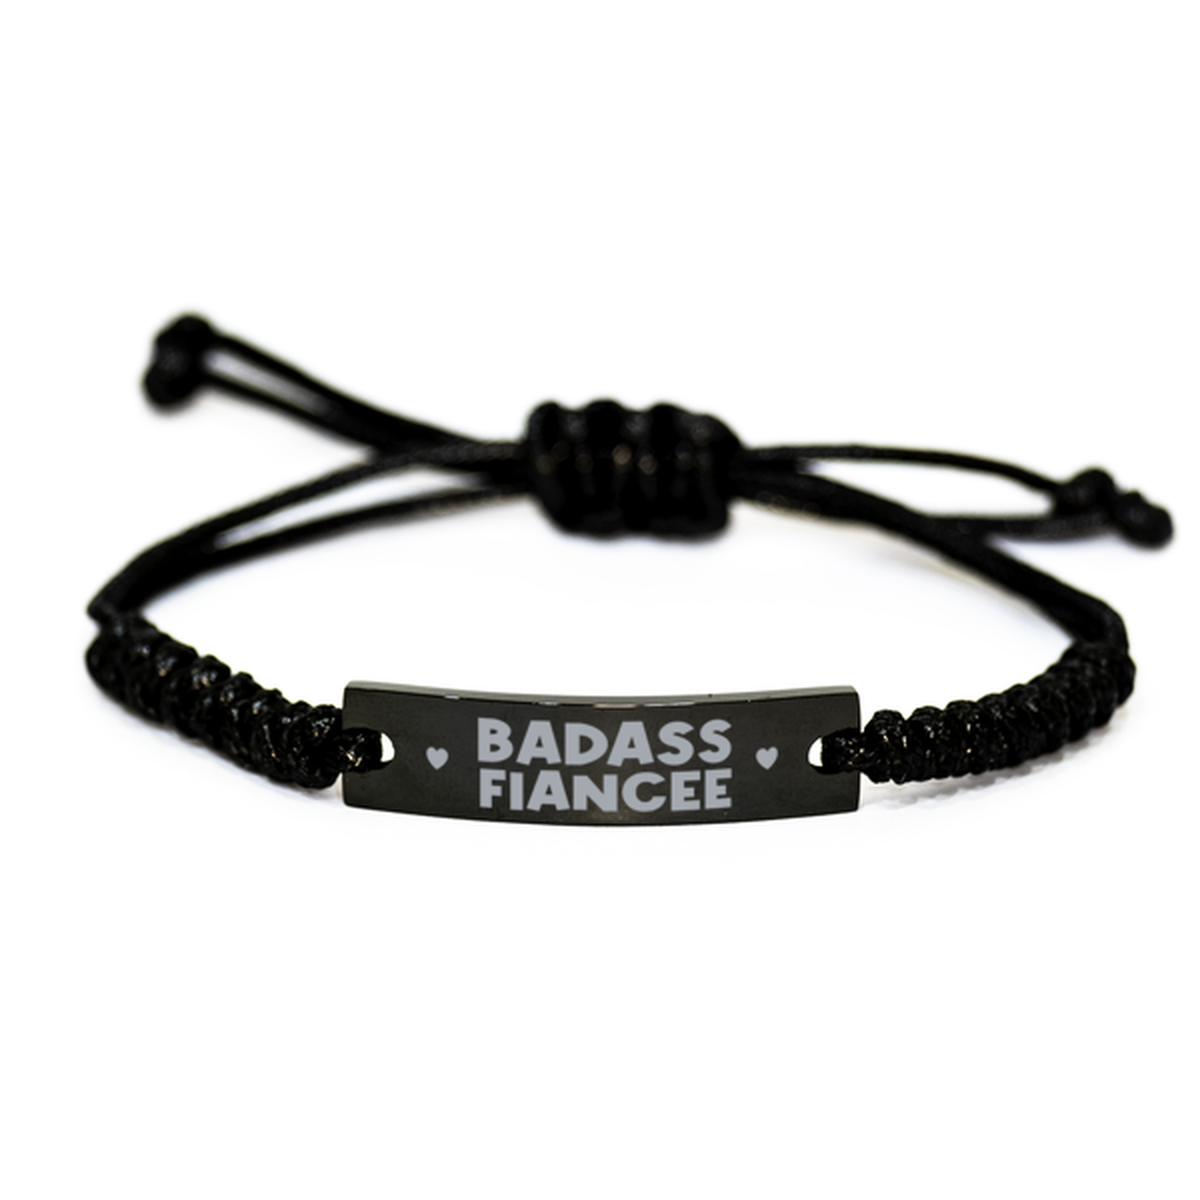 Fiancee Rope Bracelet, Badass Fiancee, Funny Family Gifts For Fiancee From Fiance